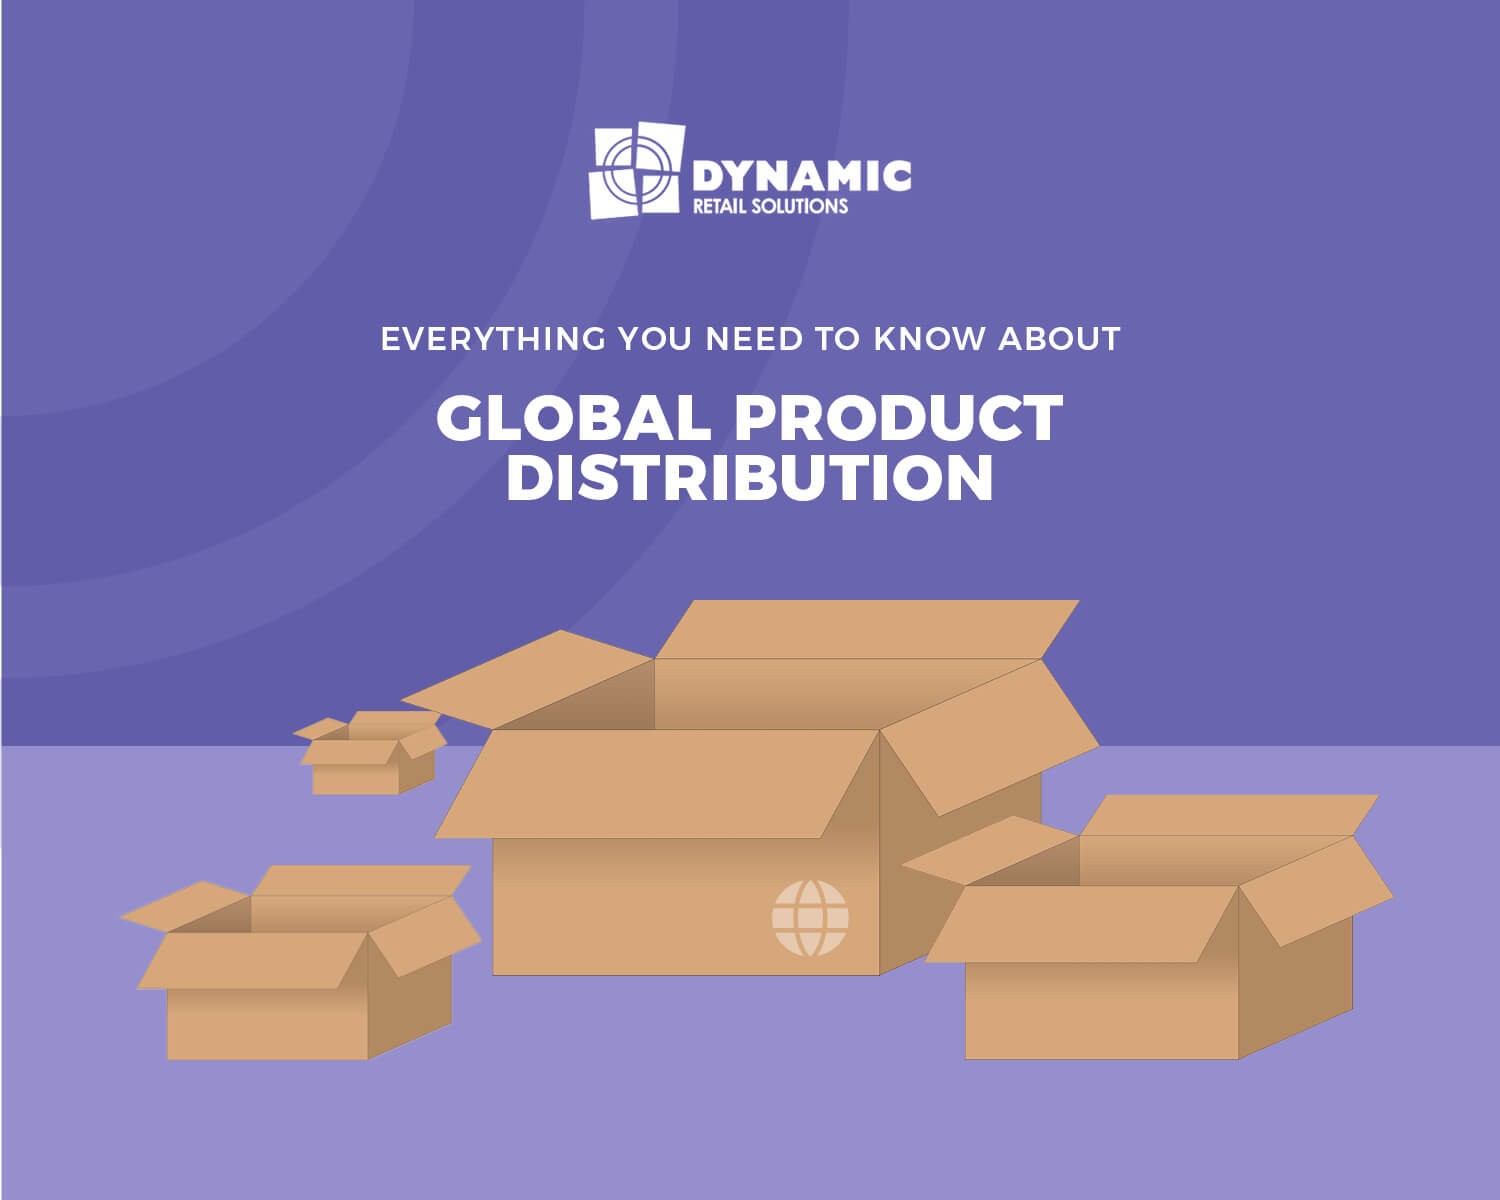 “Everything You Need to Know about Global Product Distribution” is locked Everything You Need to Know about Global Product Distribution